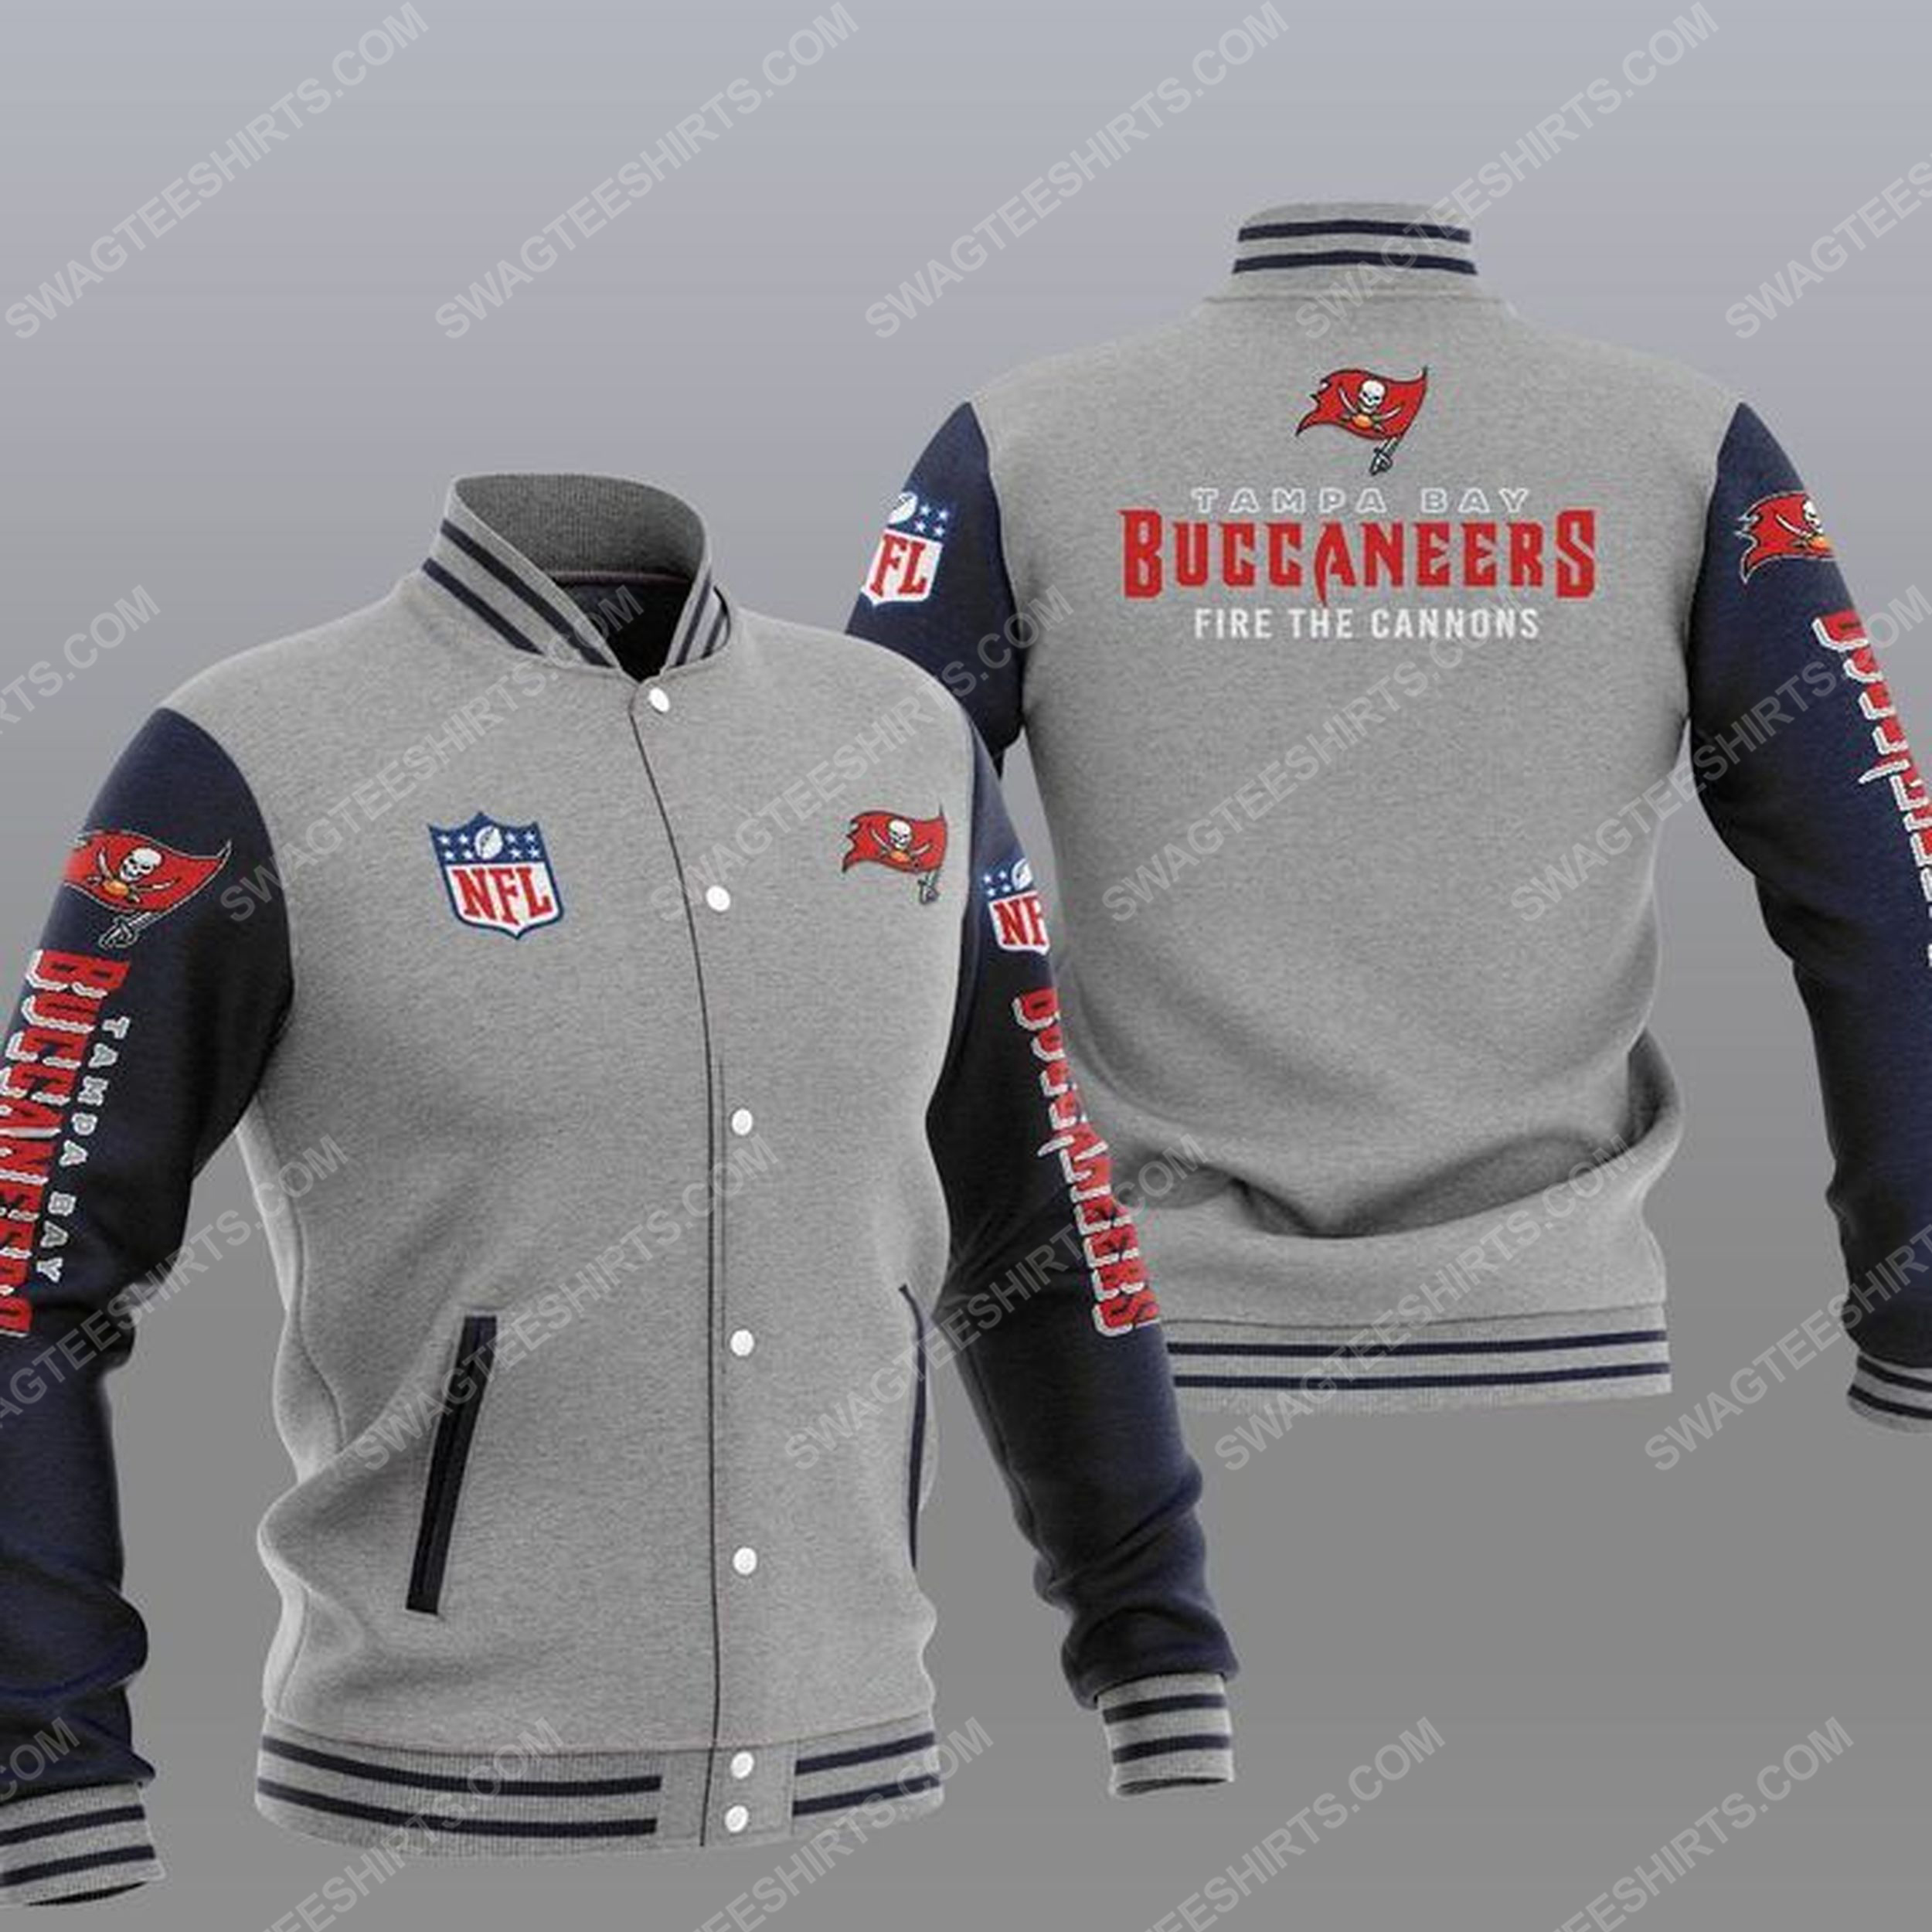 Tampa bay buccaneers fire the cannons all over print baseball jacket - gray 1